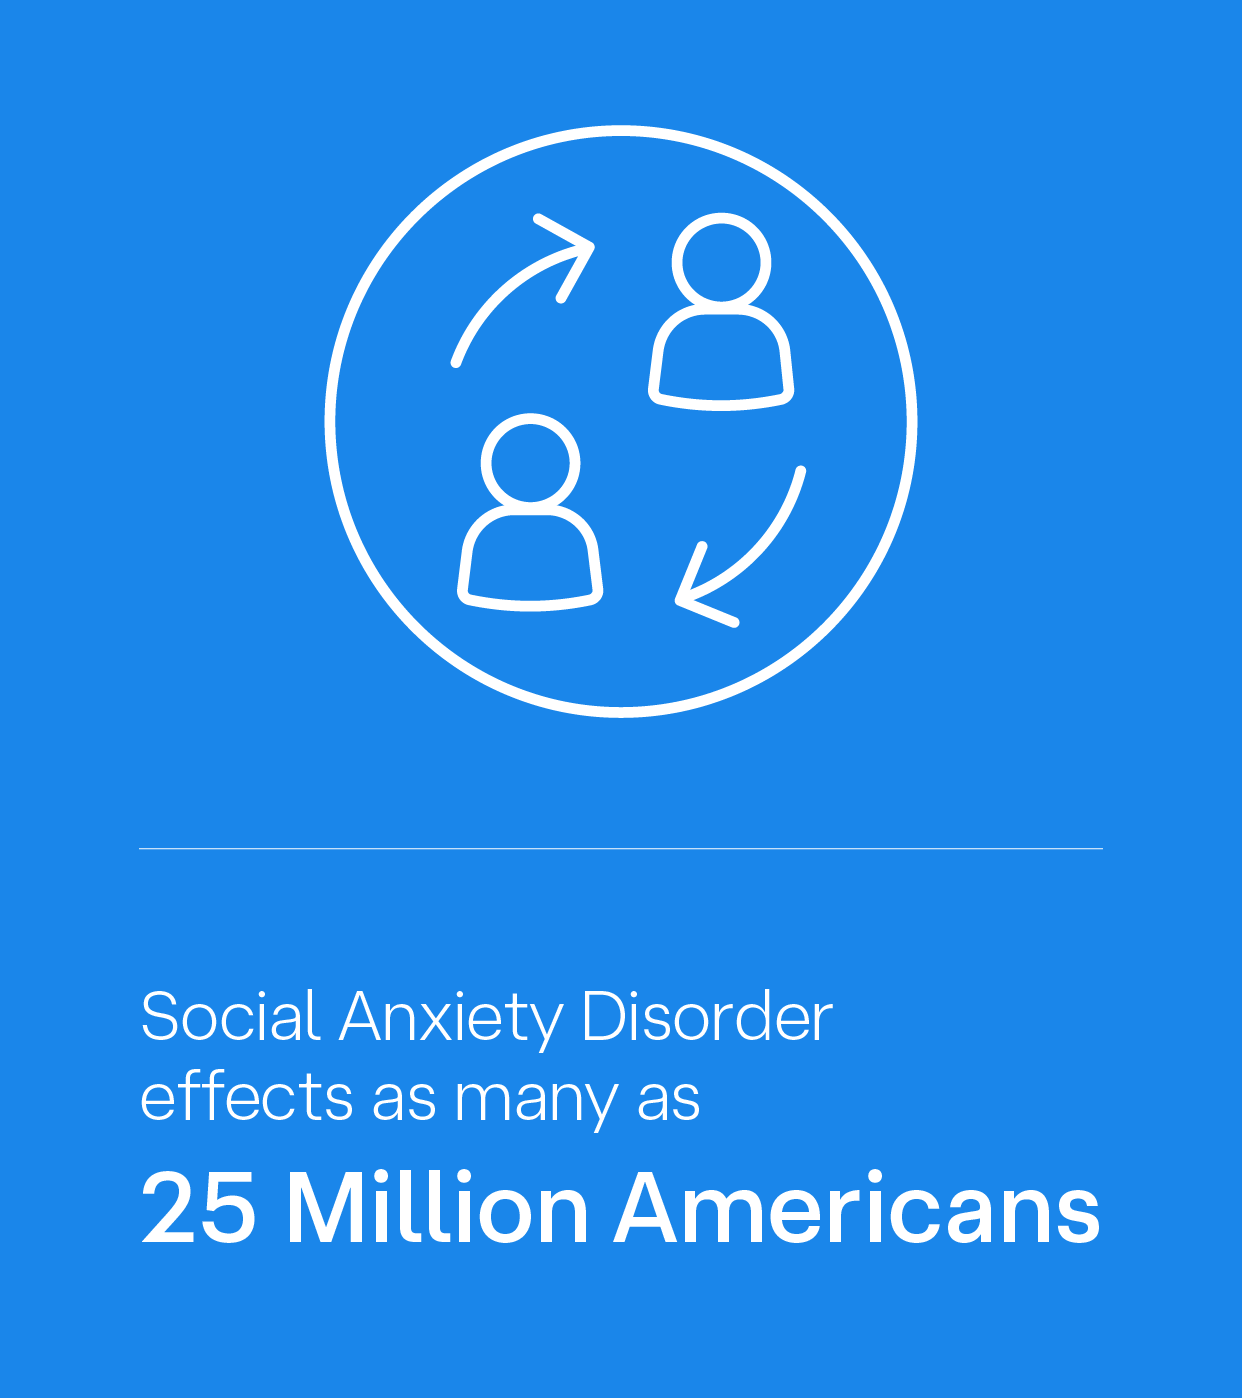 Social anxiety disorder effects as many as 25 million Americans